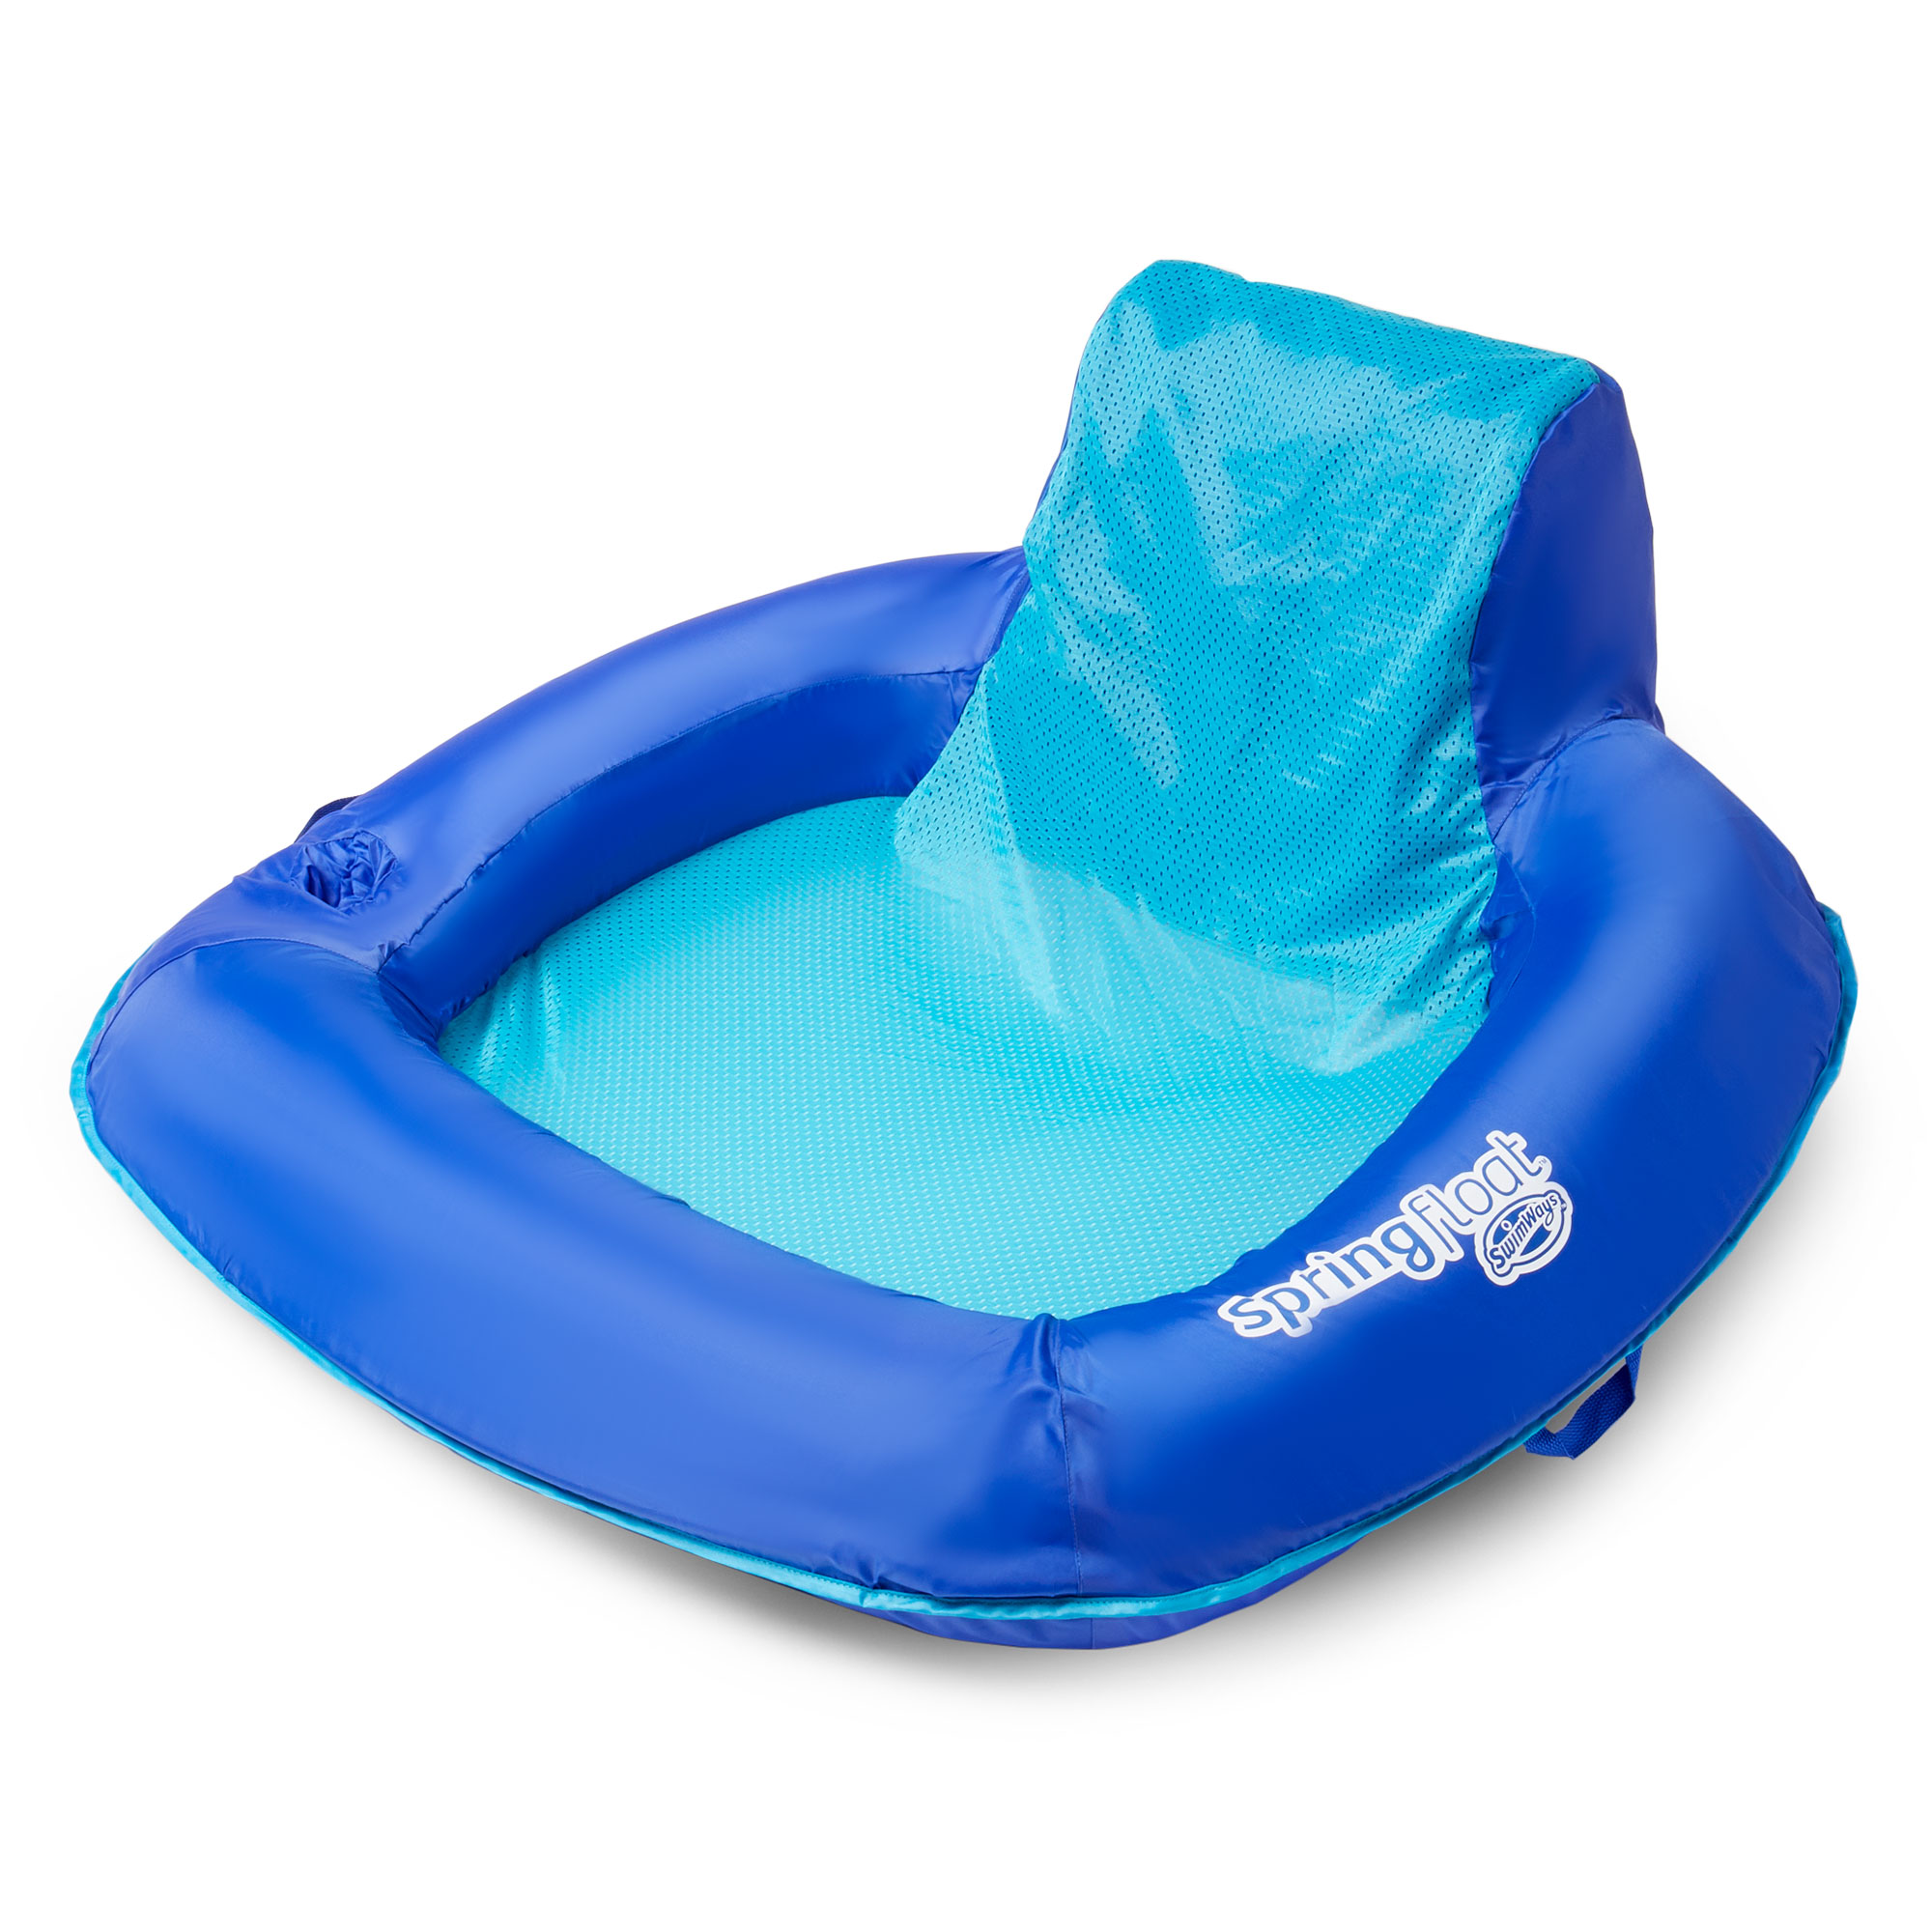 SwimWays SunSeat Floating Inflatable Swimming Pool Lounge Chair w/Armrests, Backrests, and Cup Holder, Dark Blue - image 1 of 8